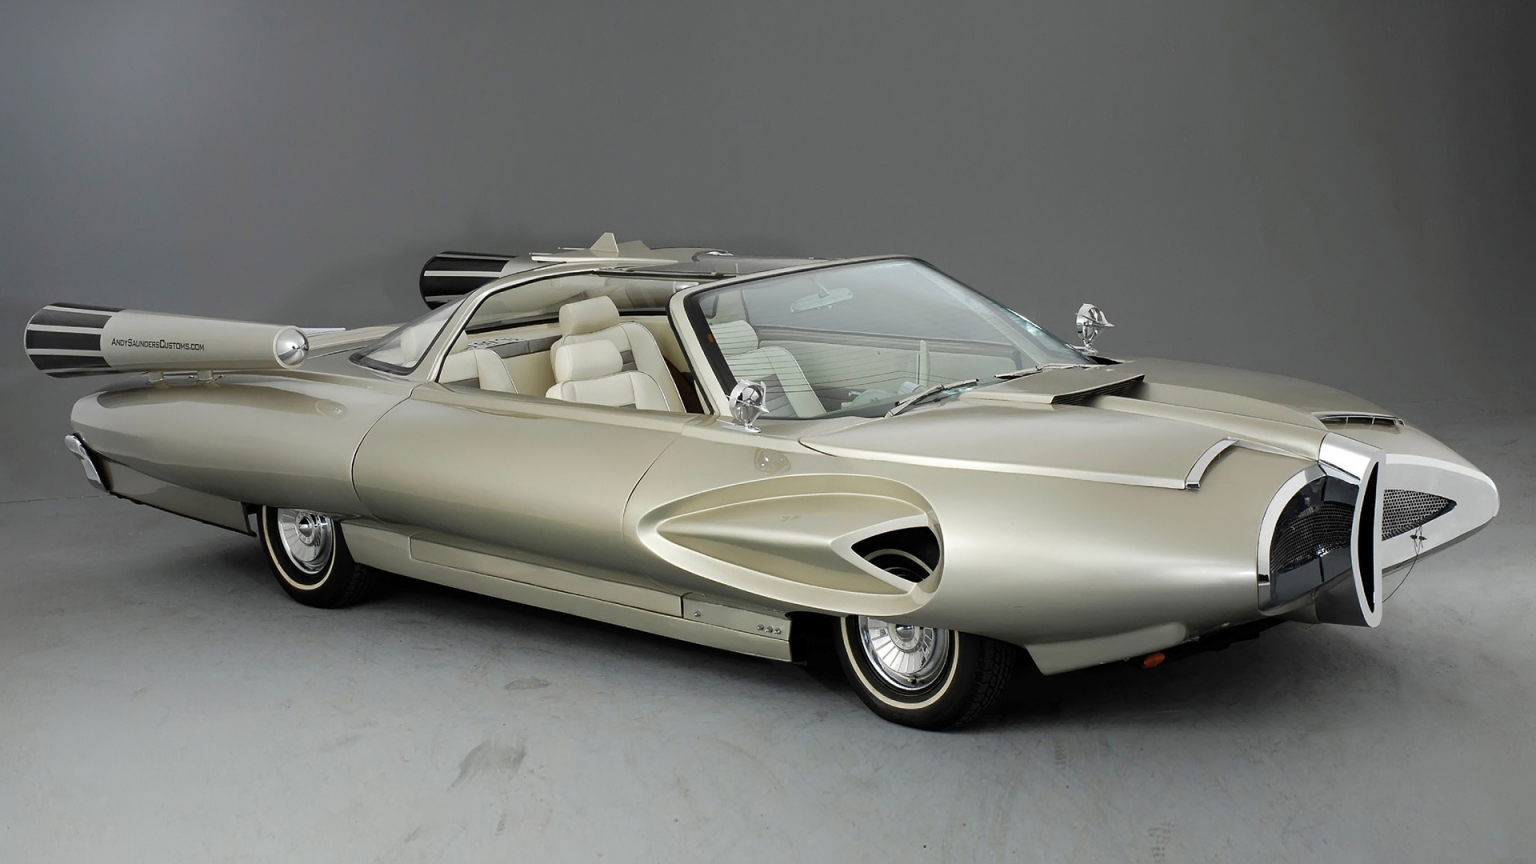 Ford X 2000 Concept Car 1958 for 1536 x 864 HDTV resolution